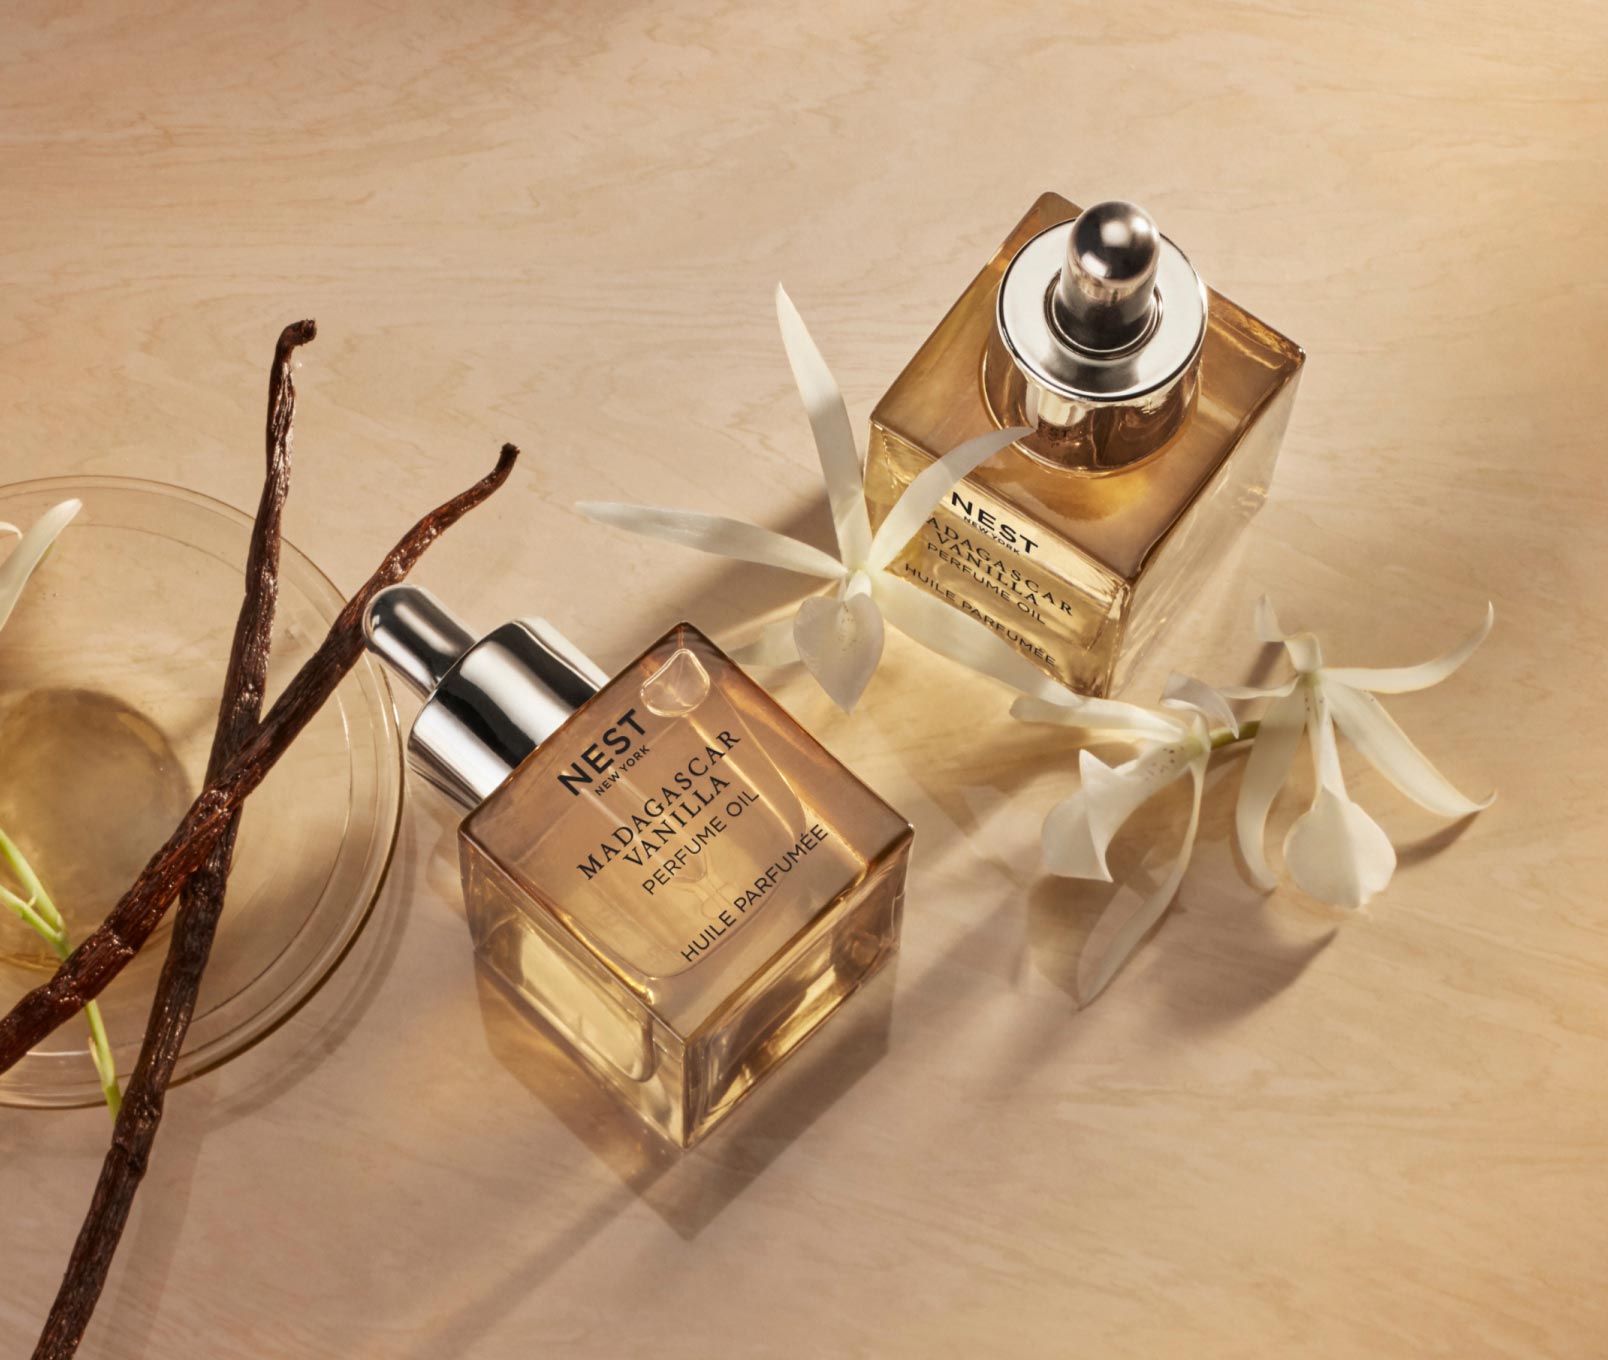 People Call This Madagascar Vanilla Body Oil 'Heaven In a Bottle' For Its  Long-Lasting, 'Impeccable' Scent